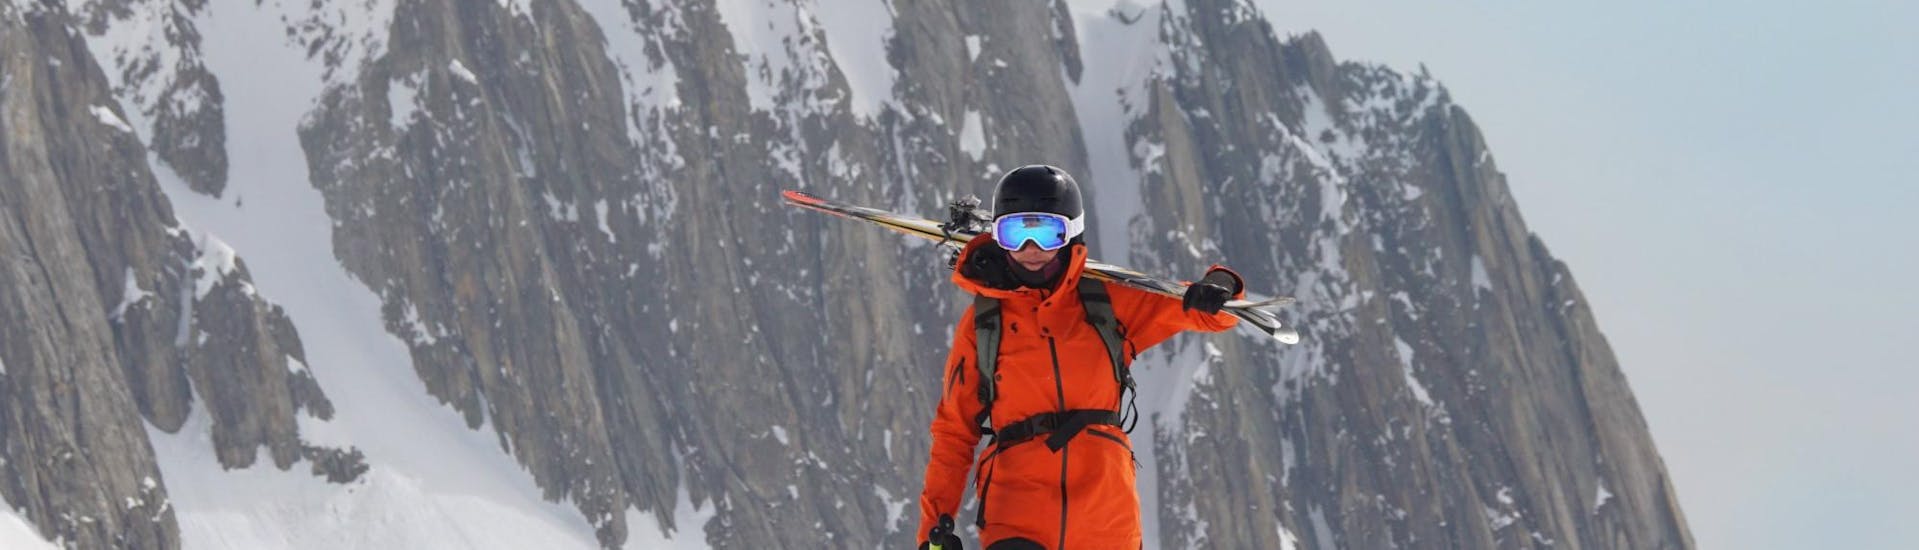 Private Ski Lessons "Premium" for Adults of All Levels from Eco Ski School Andermatt.